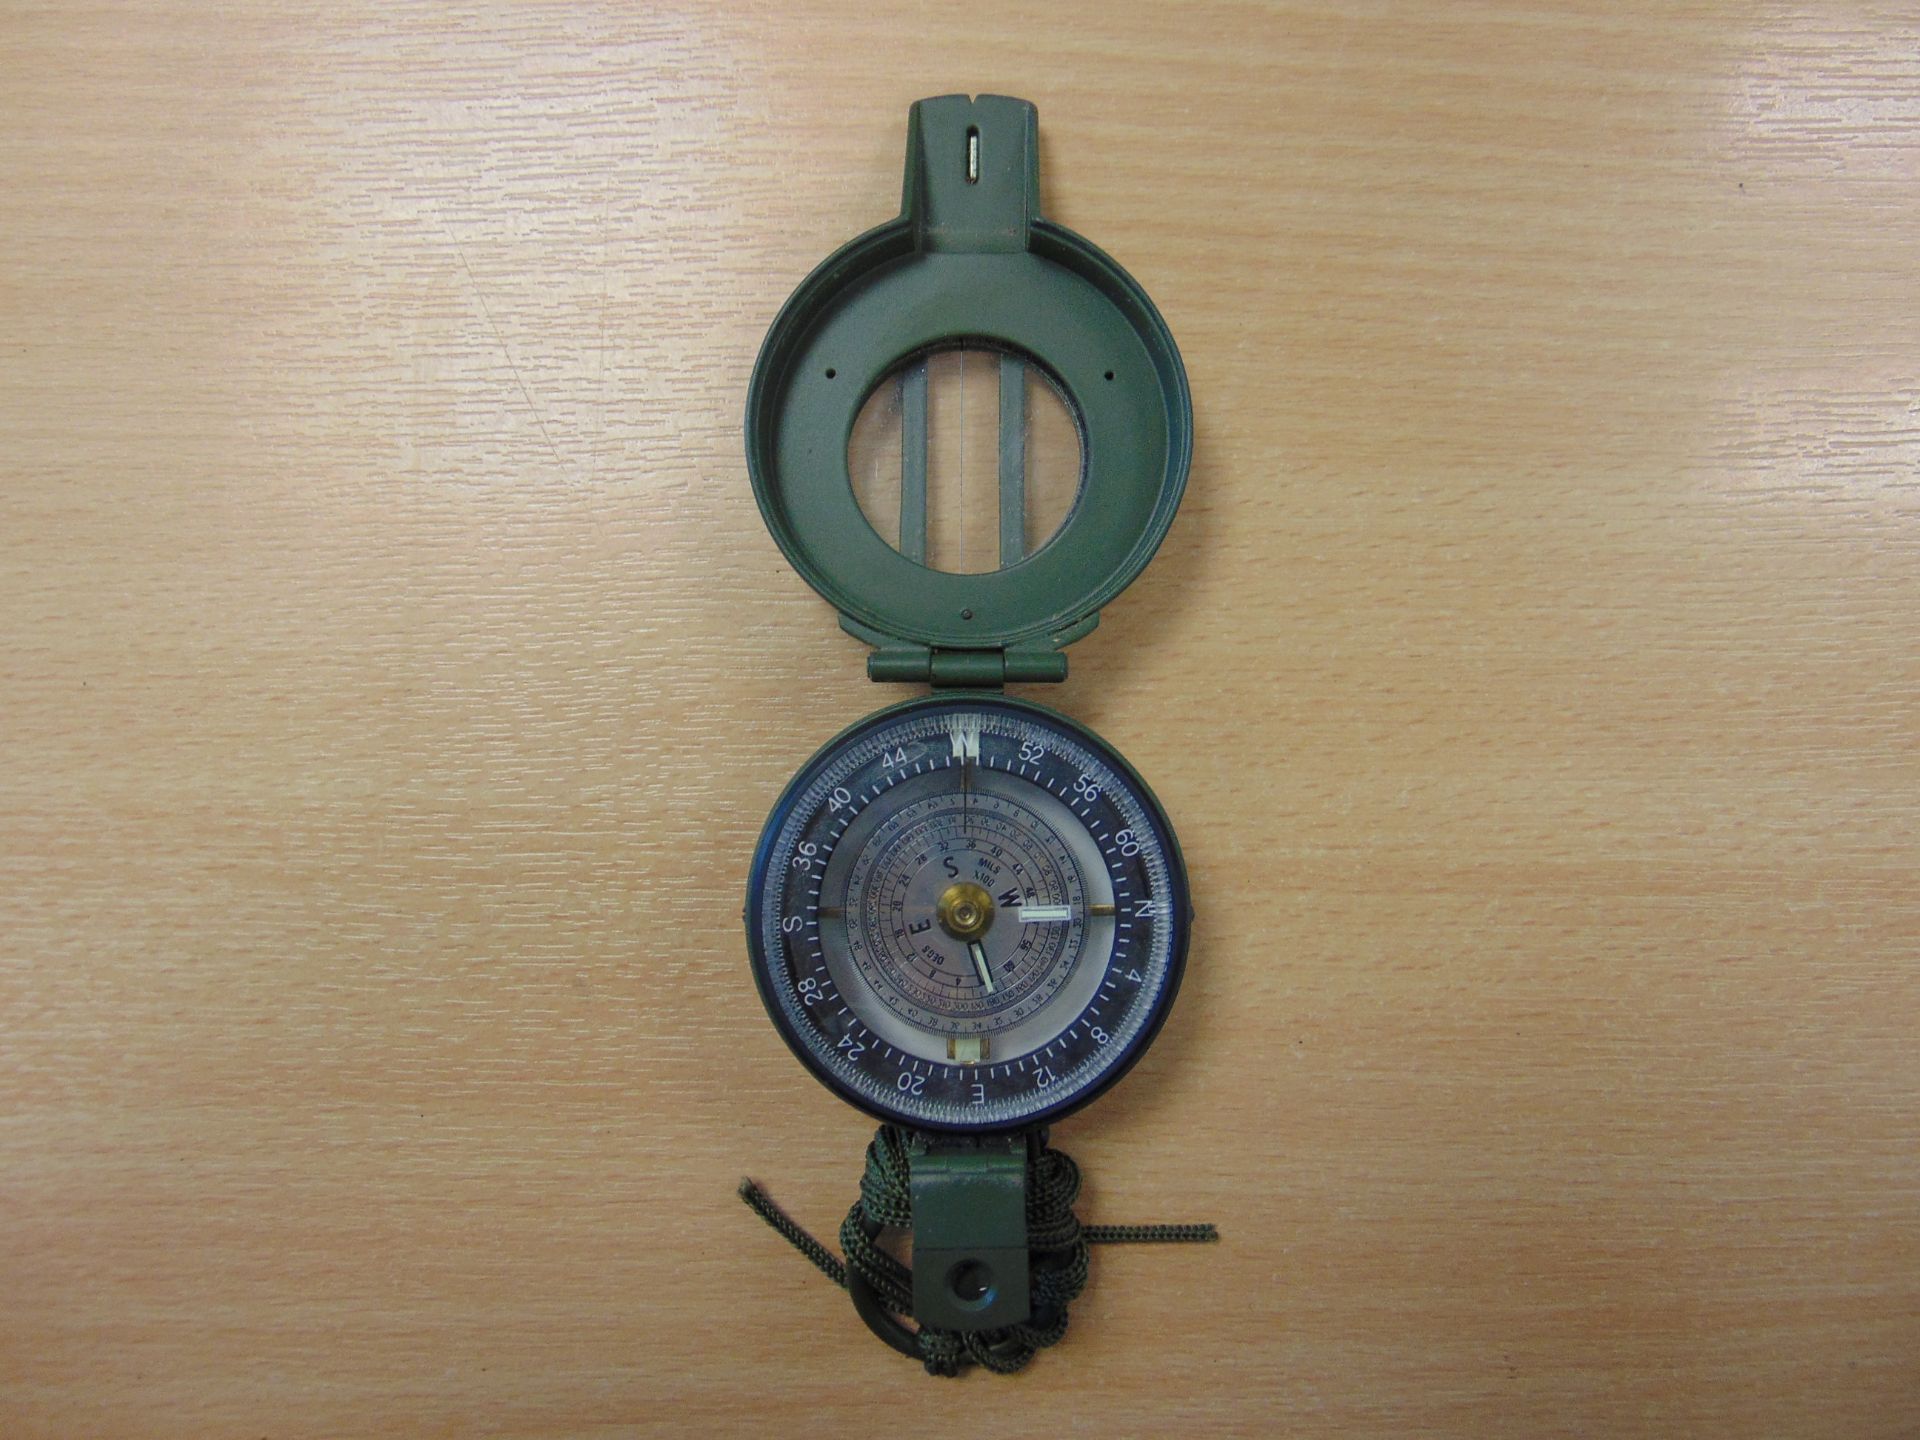 Francis Barker M88 British Army Prismatic Compass in Mils - Image 3 of 9